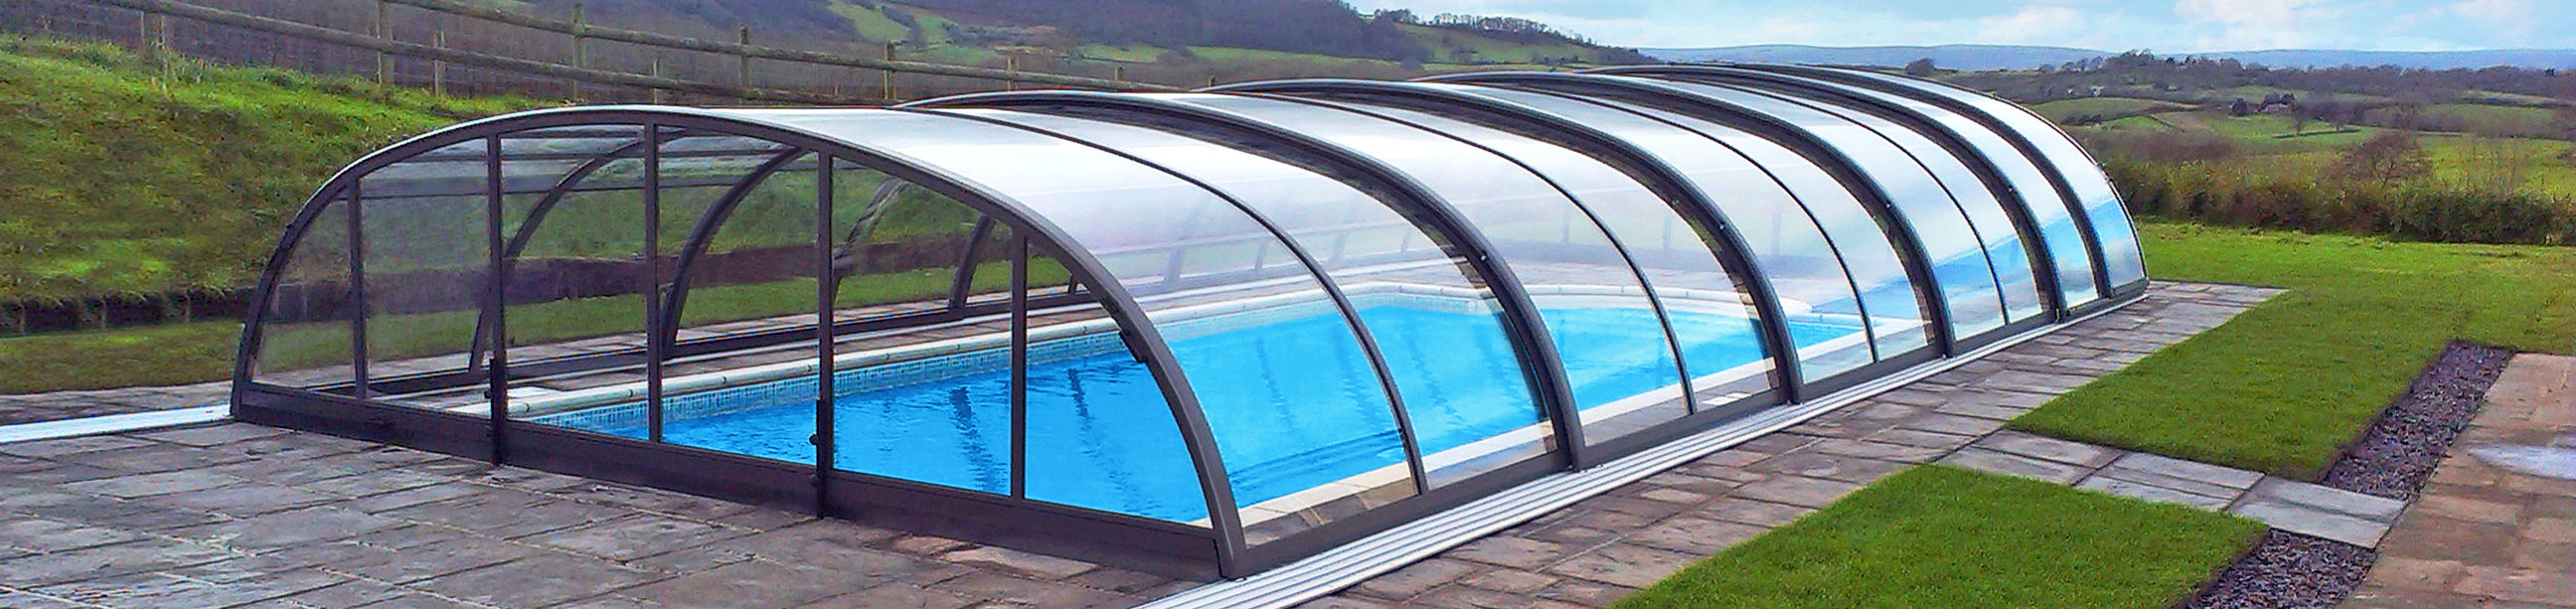 Low profile retractable pool enclosure that is classified as temporary structure